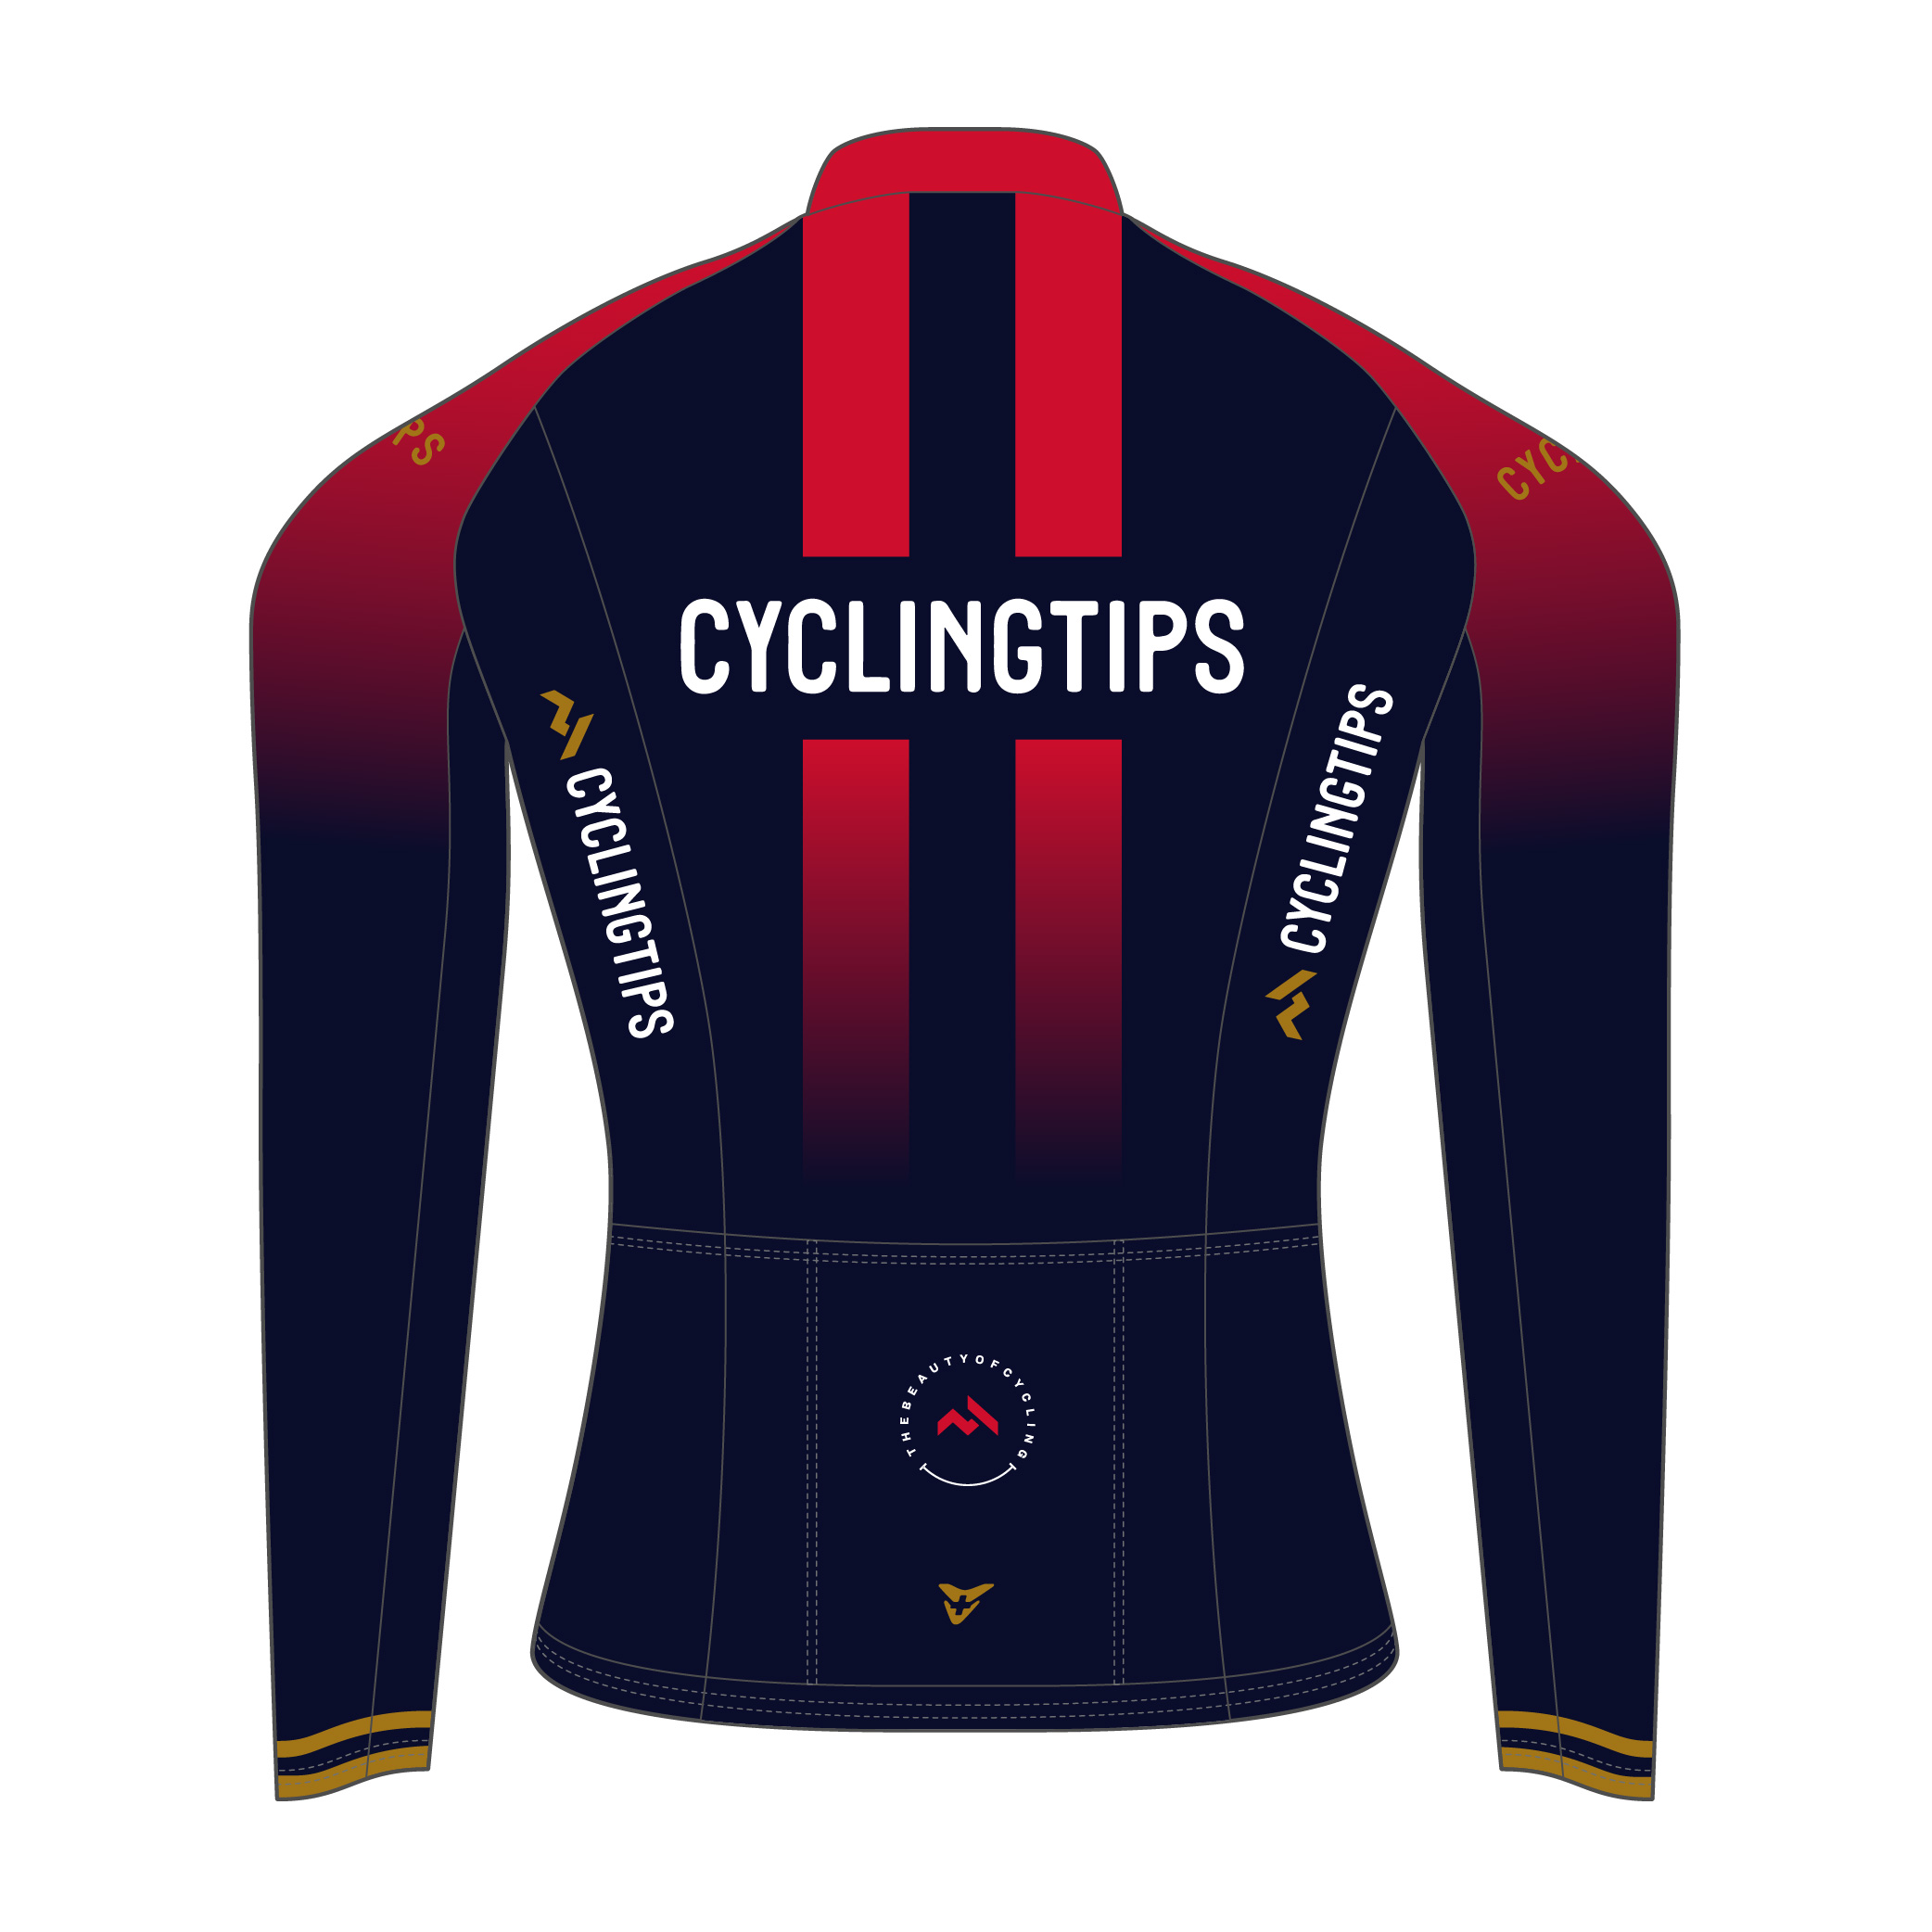 cycling-tips-22-s-52-0009-red-blue-top-back-3.jpg